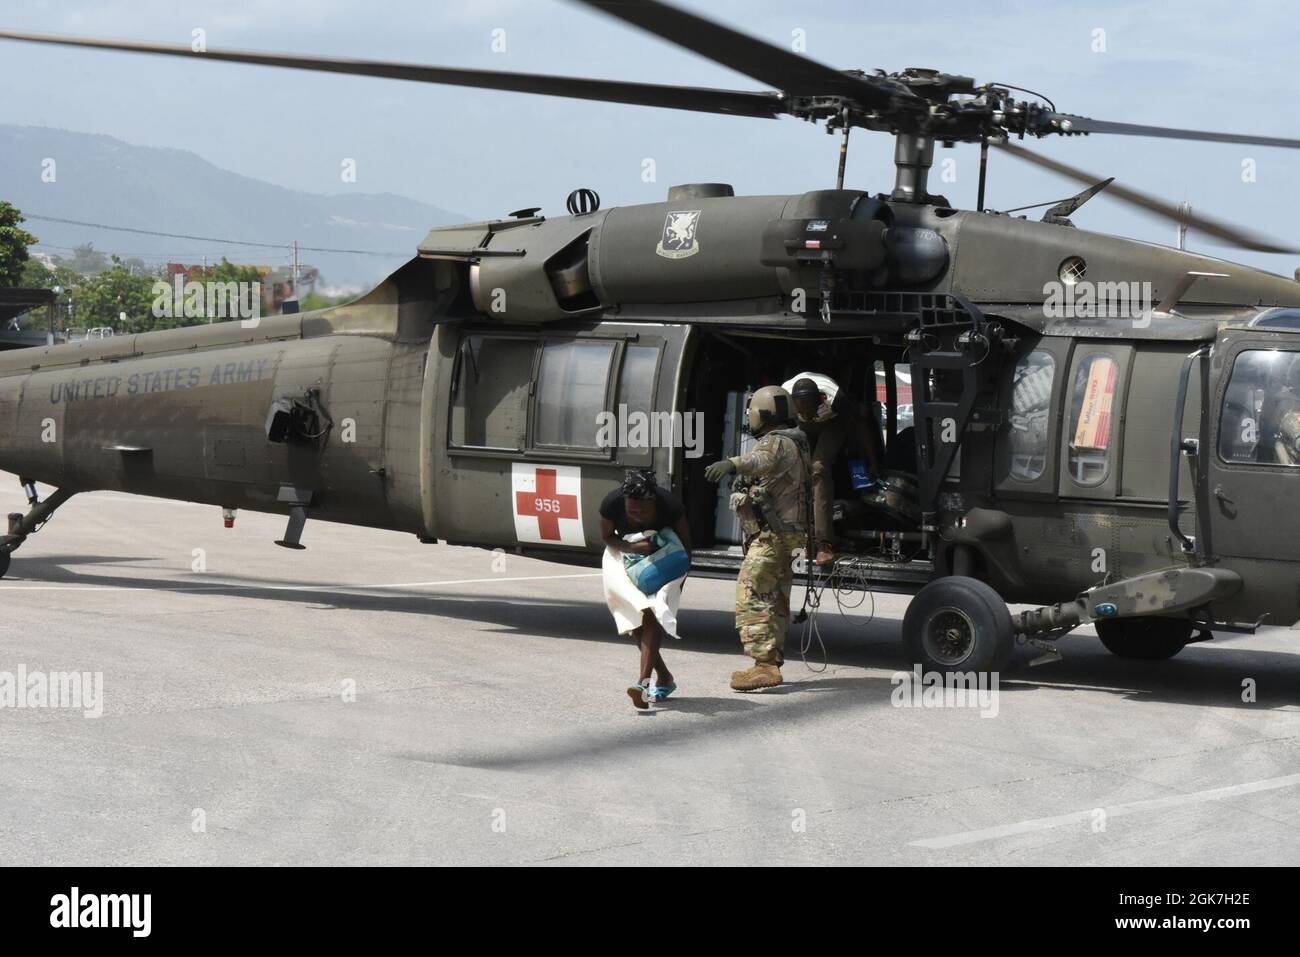 U.S. forces with Joint Task Force – Haiti, airlift injured and displaced Haitian’s to receive medical aid to Port-au-Prince International Airport Aug. 26, 2021.  Since Aug. 26 aircrews have given critical medical triage to over 400 Haitians after a 7.2 earthquake hit the area Aug. 14, 2021. Stock Photo